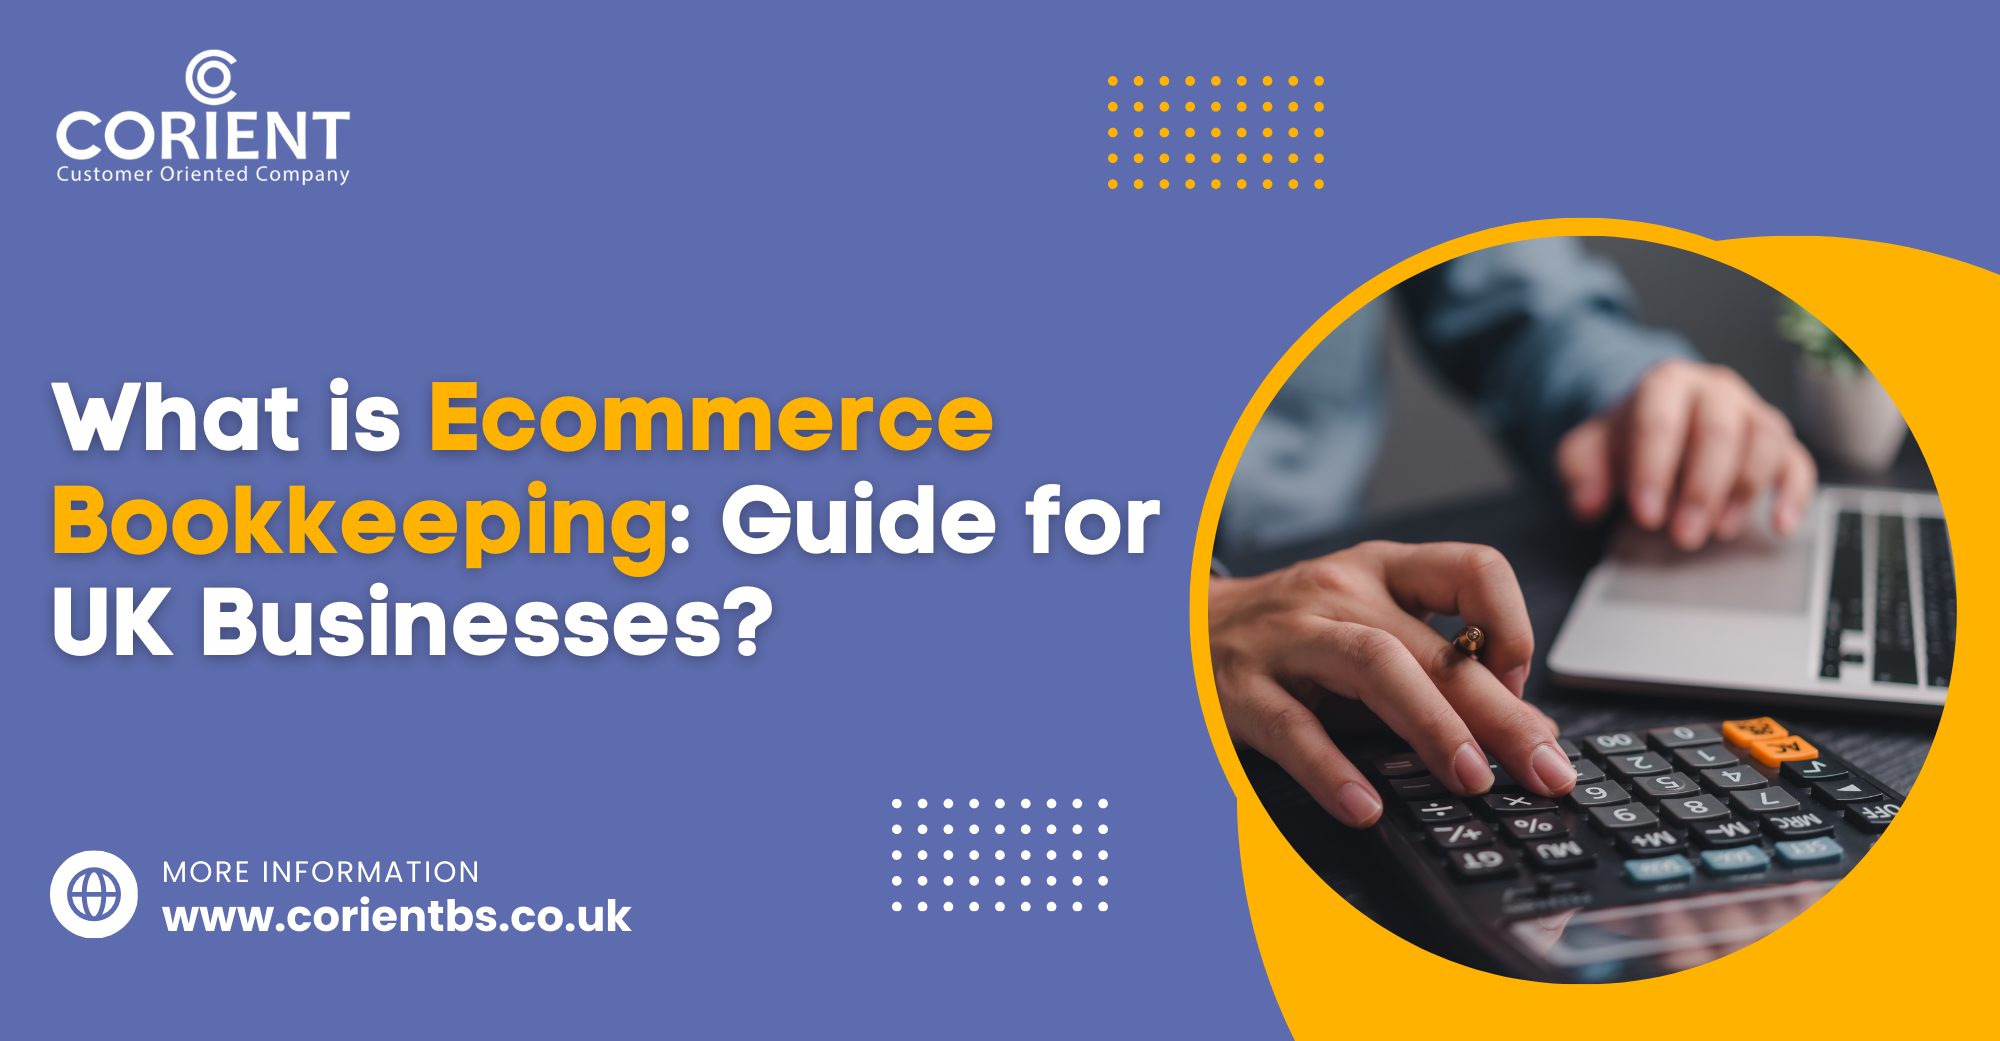 What is Ecommerce Bookkeeping: Guide for UK Businesses?